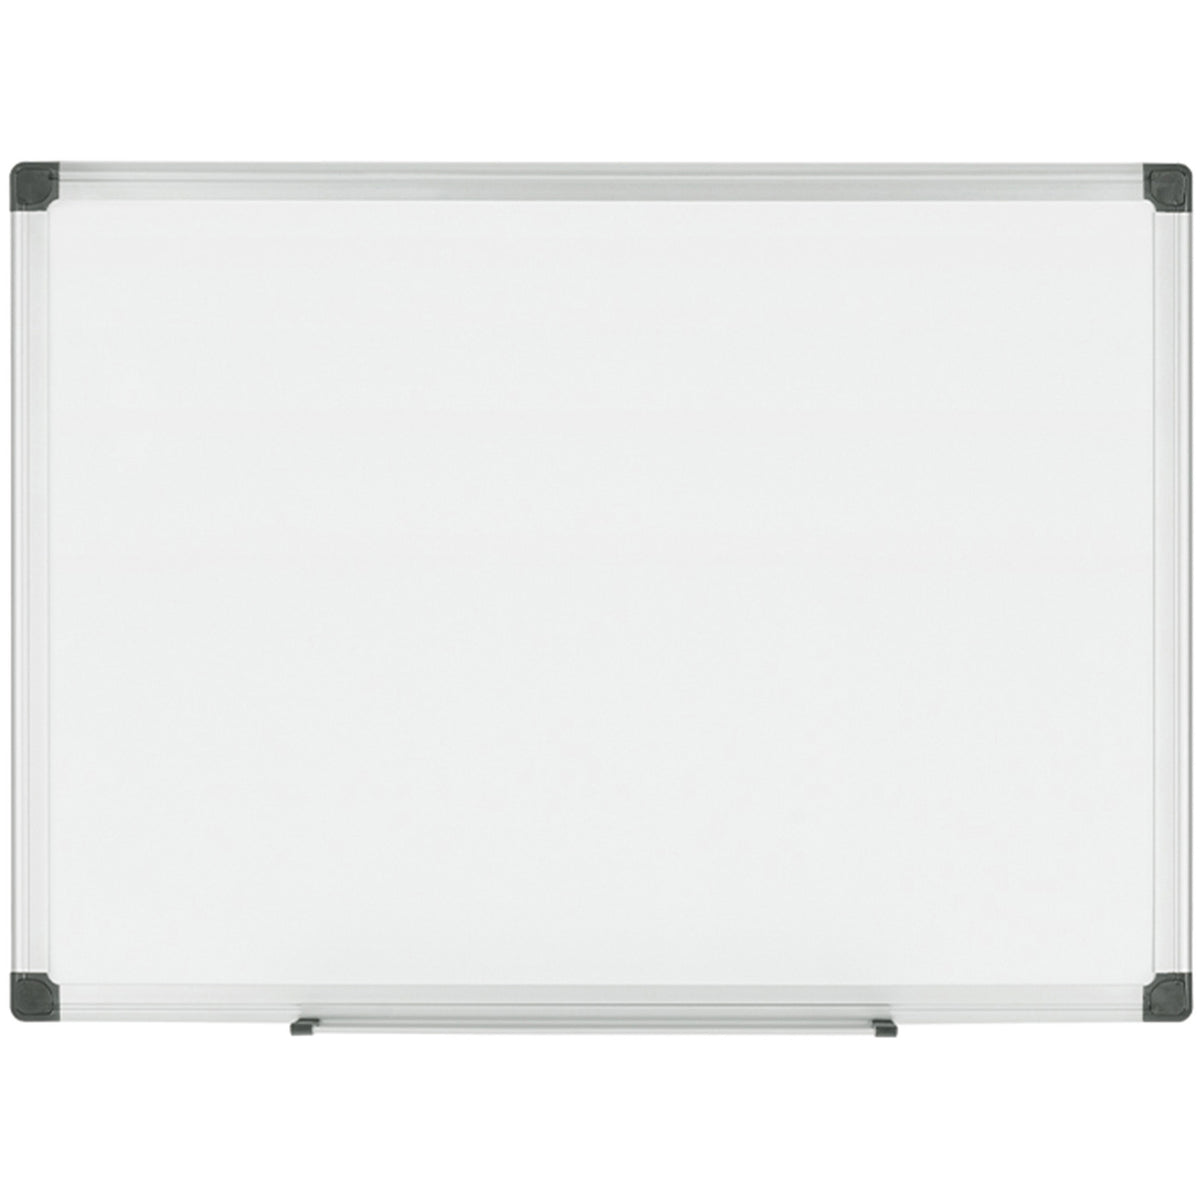 CR1201170MV Maya Series Magnetic Dry Erase Board, Porcelain Whiteboard, Snap-On Marker Tray, Wall Mounting Kit, 48" x 72", Aluminum Frame by MasterVision